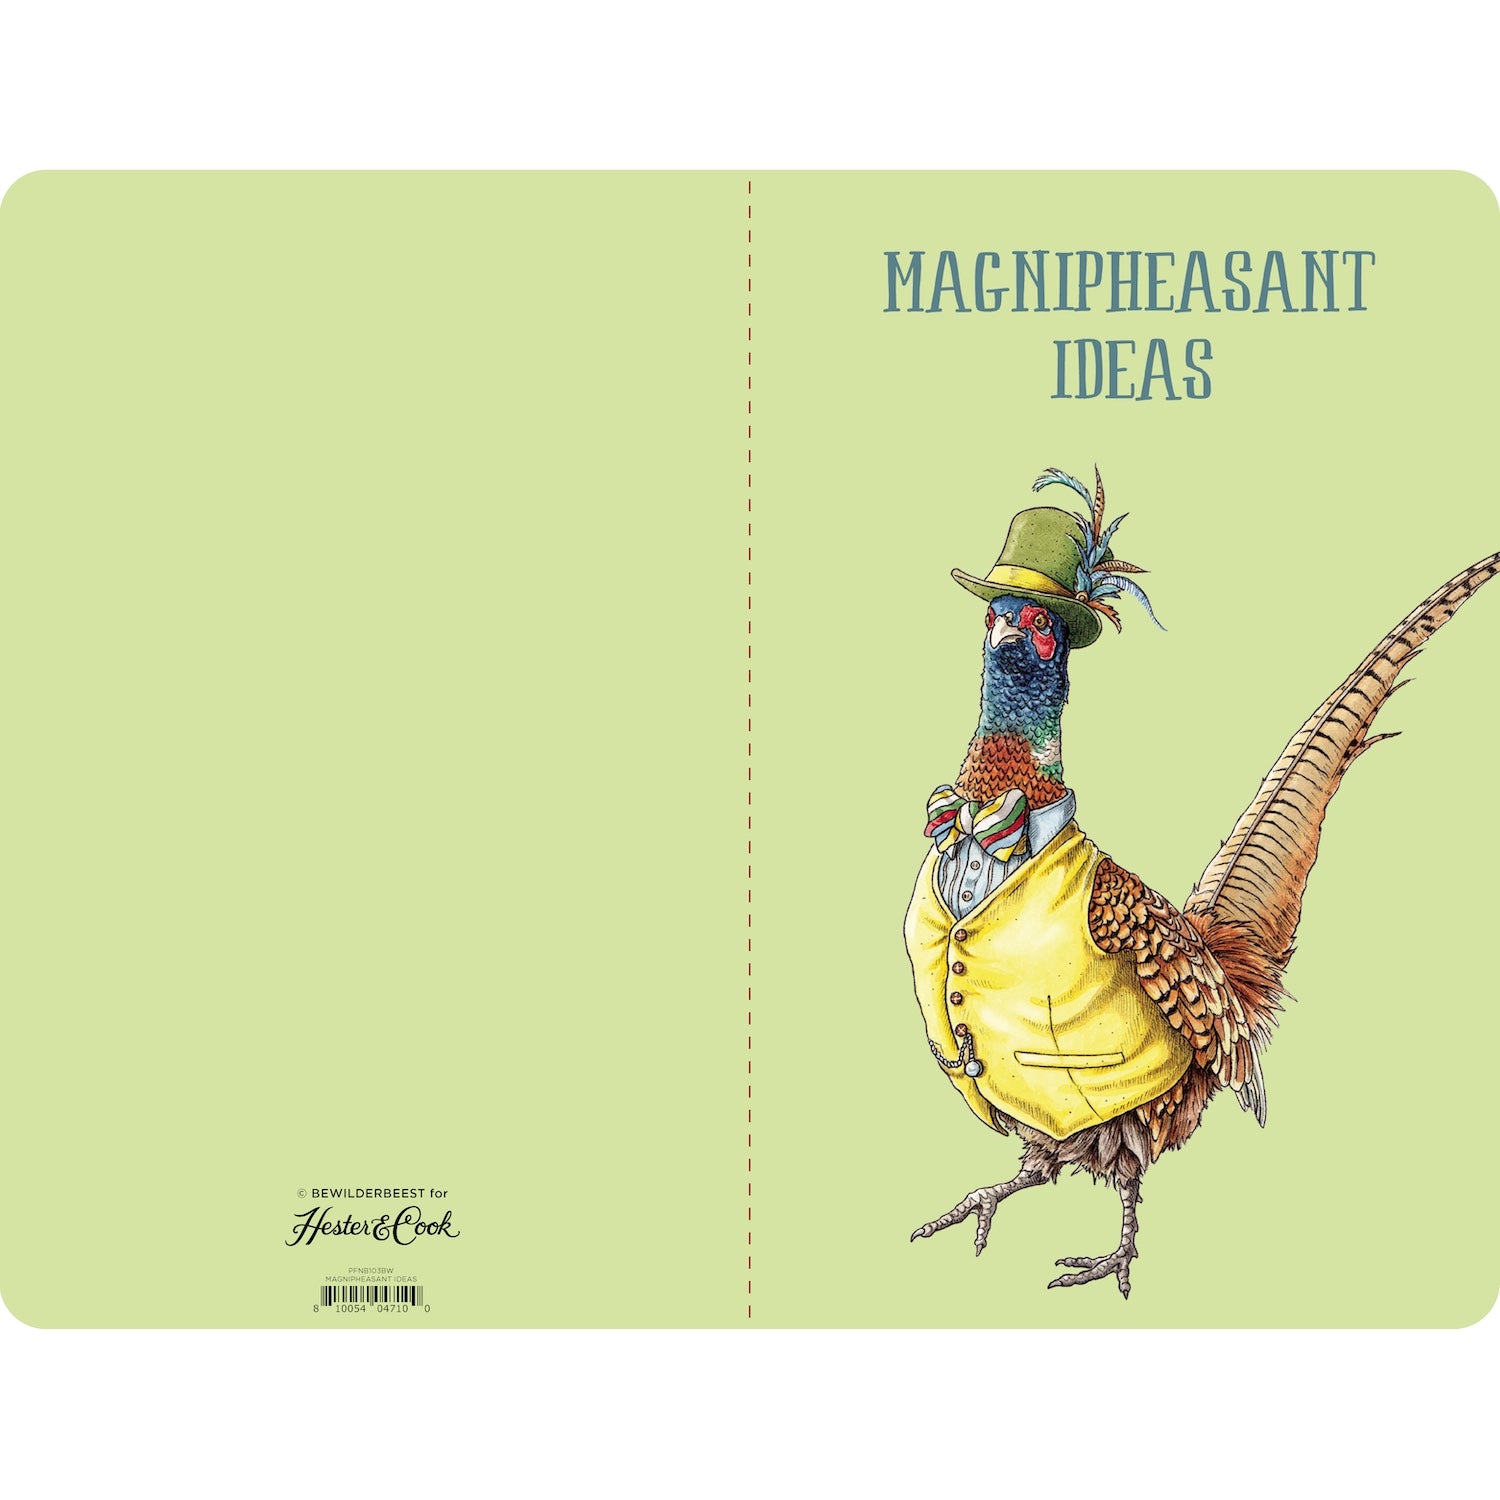 The back and front covers of the Magnipheasant Ideas Notebook are light green, with the front featuring the illustrated pheasant. 